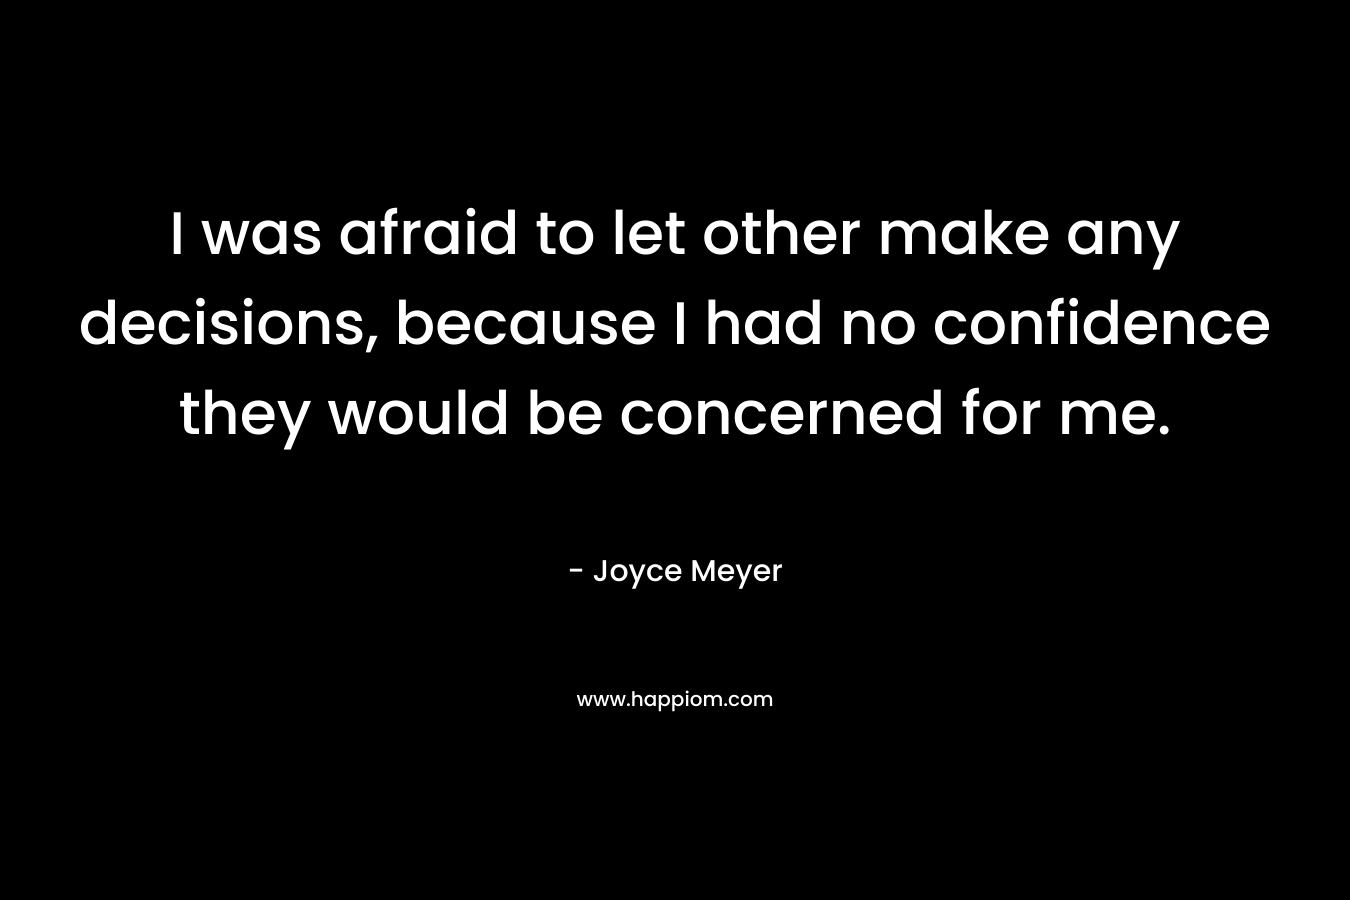 I was afraid to let other make any decisions, because I had no confidence they would be concerned for me.